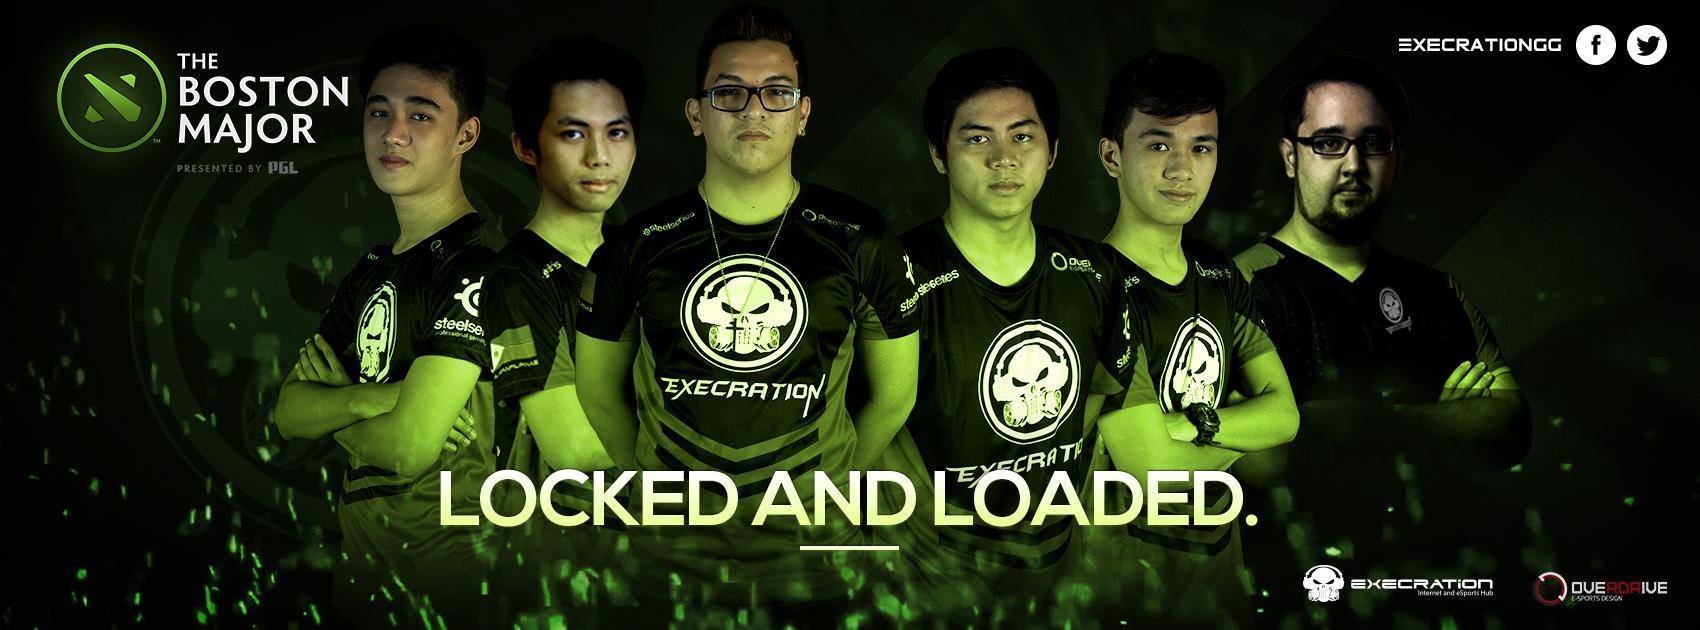 Execration is all in for the Boston Major! (image courtesy of the Execration Facebook page)